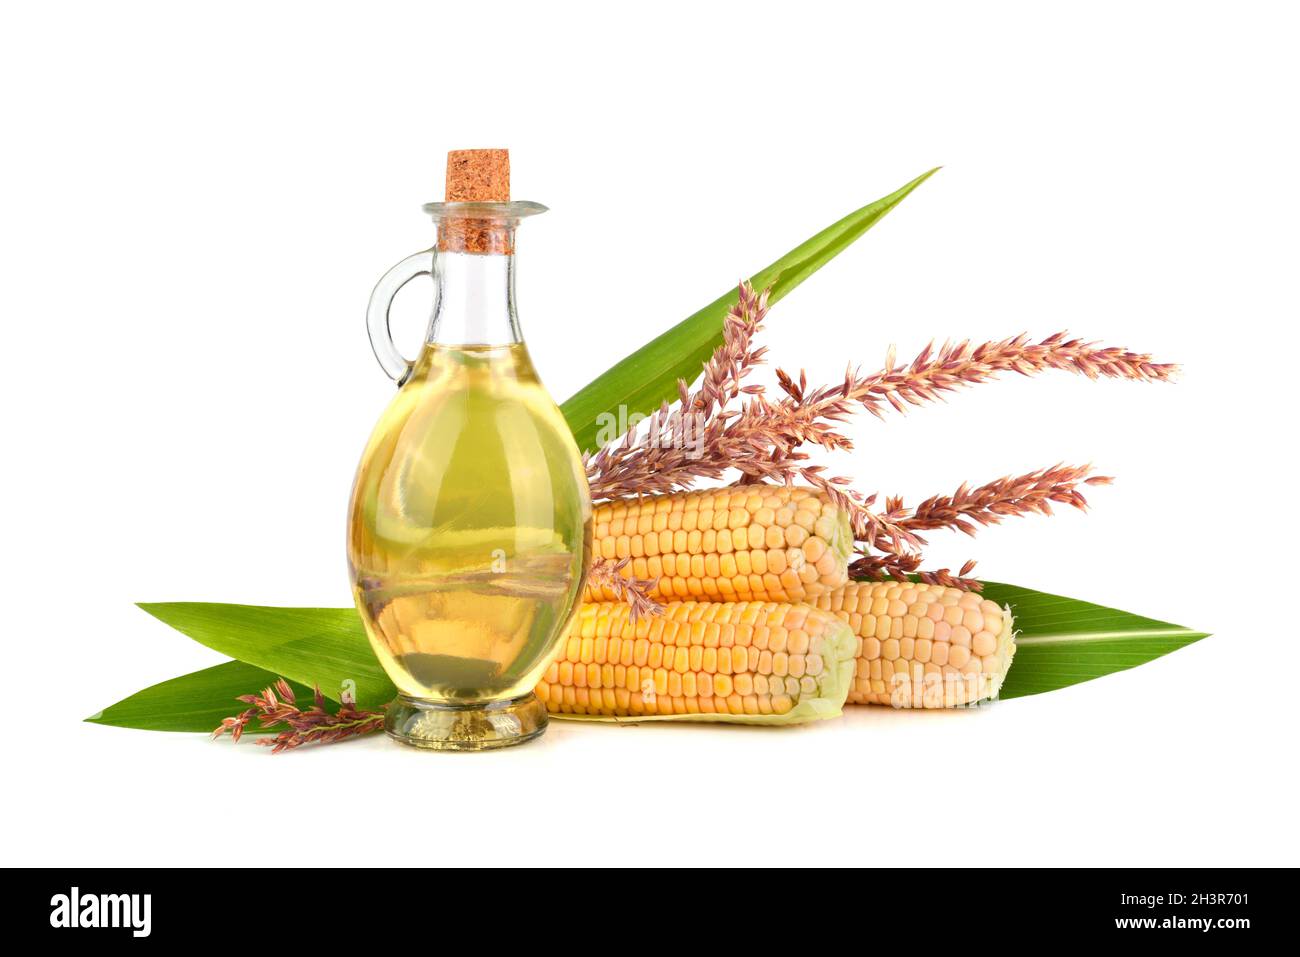 Corn oil with cobs Stock Photo